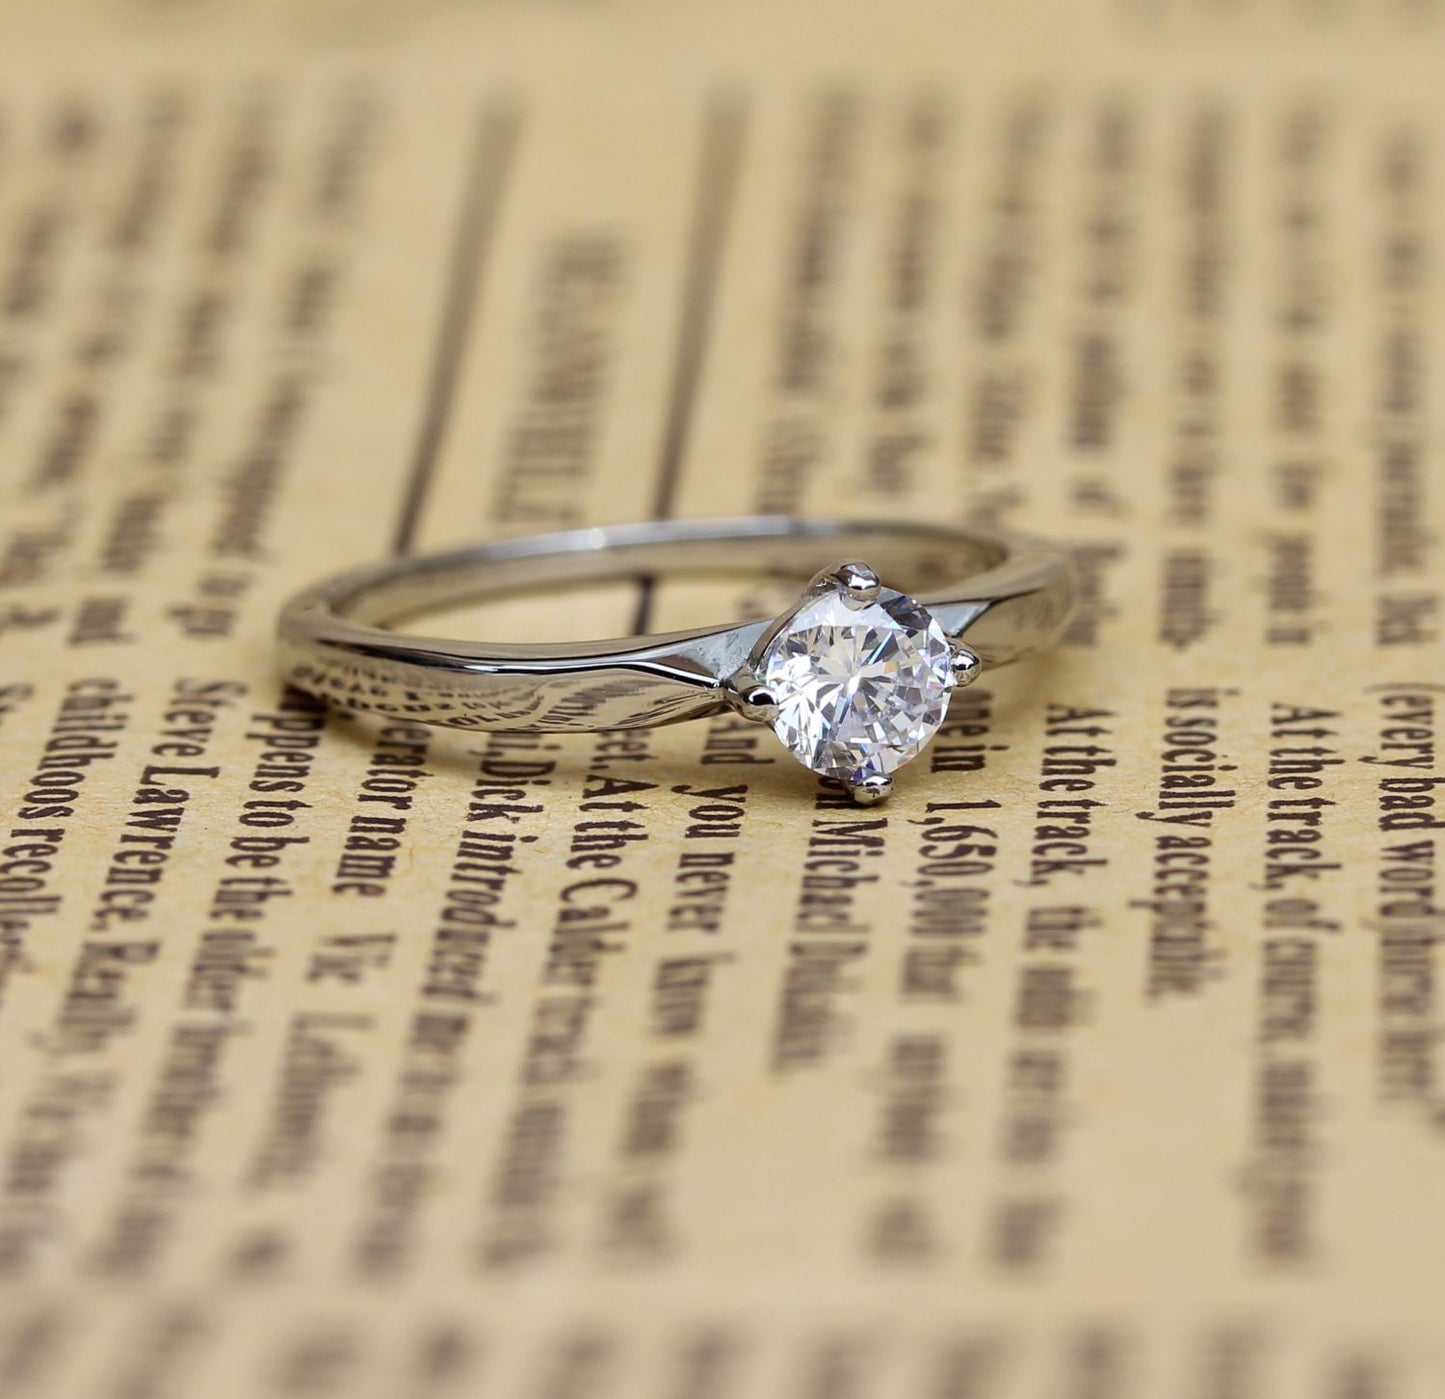 Genuine White Moissanite solitaire ring available in Titanium or white gold - engagement ring - wedding ring